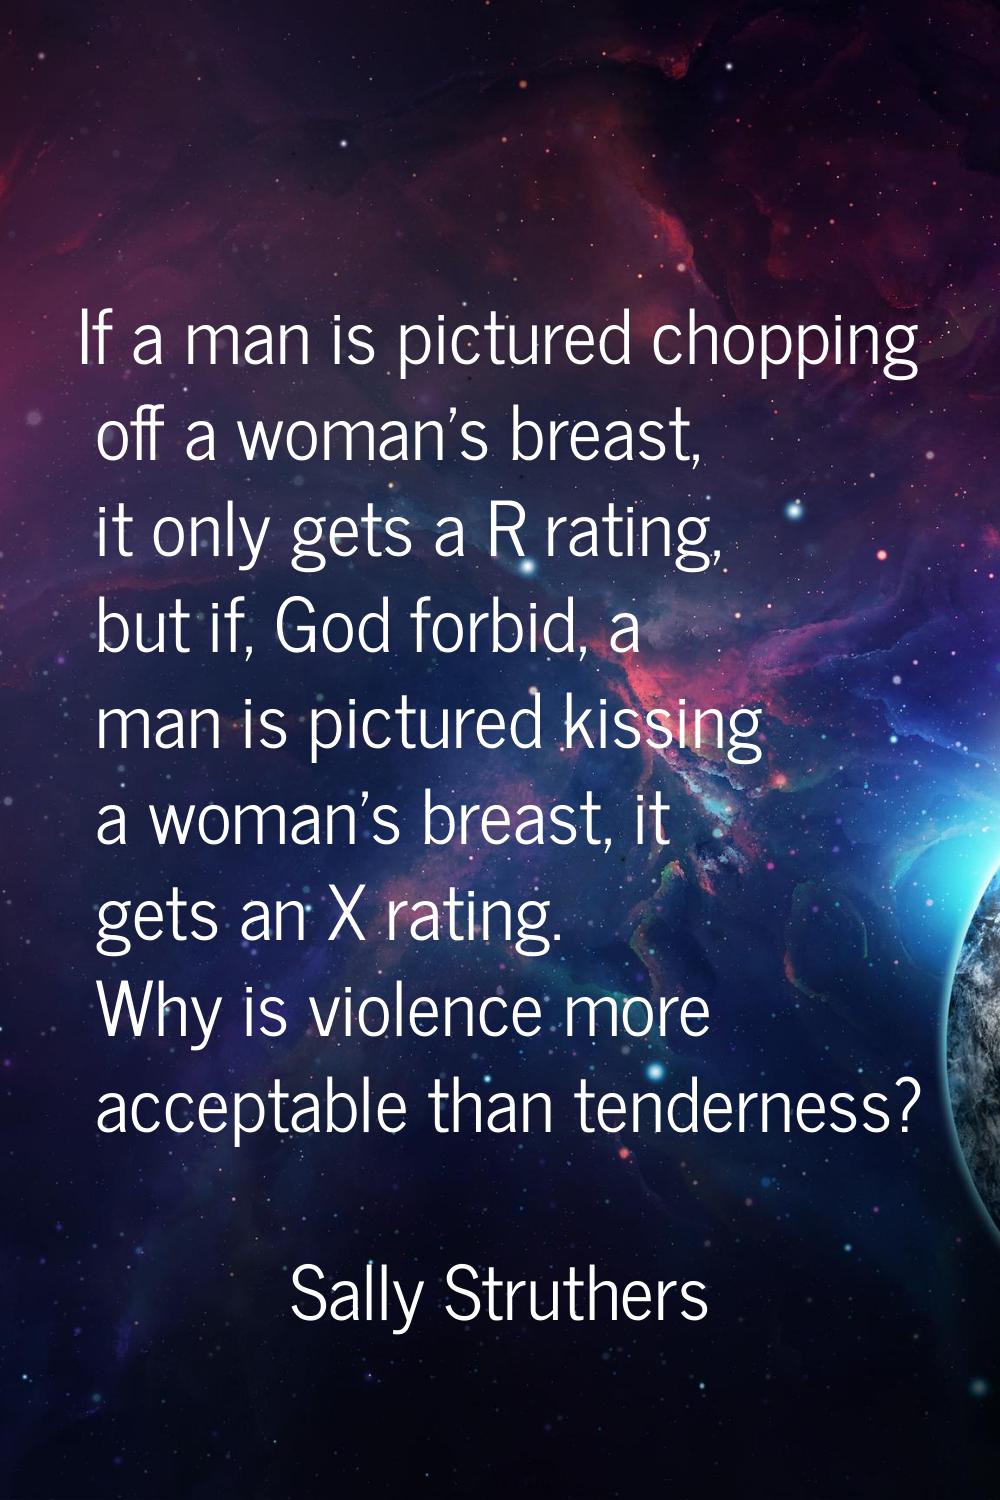 If a man is pictured chopping off a woman's breast, it only gets a R rating, but if, God forbid, a 